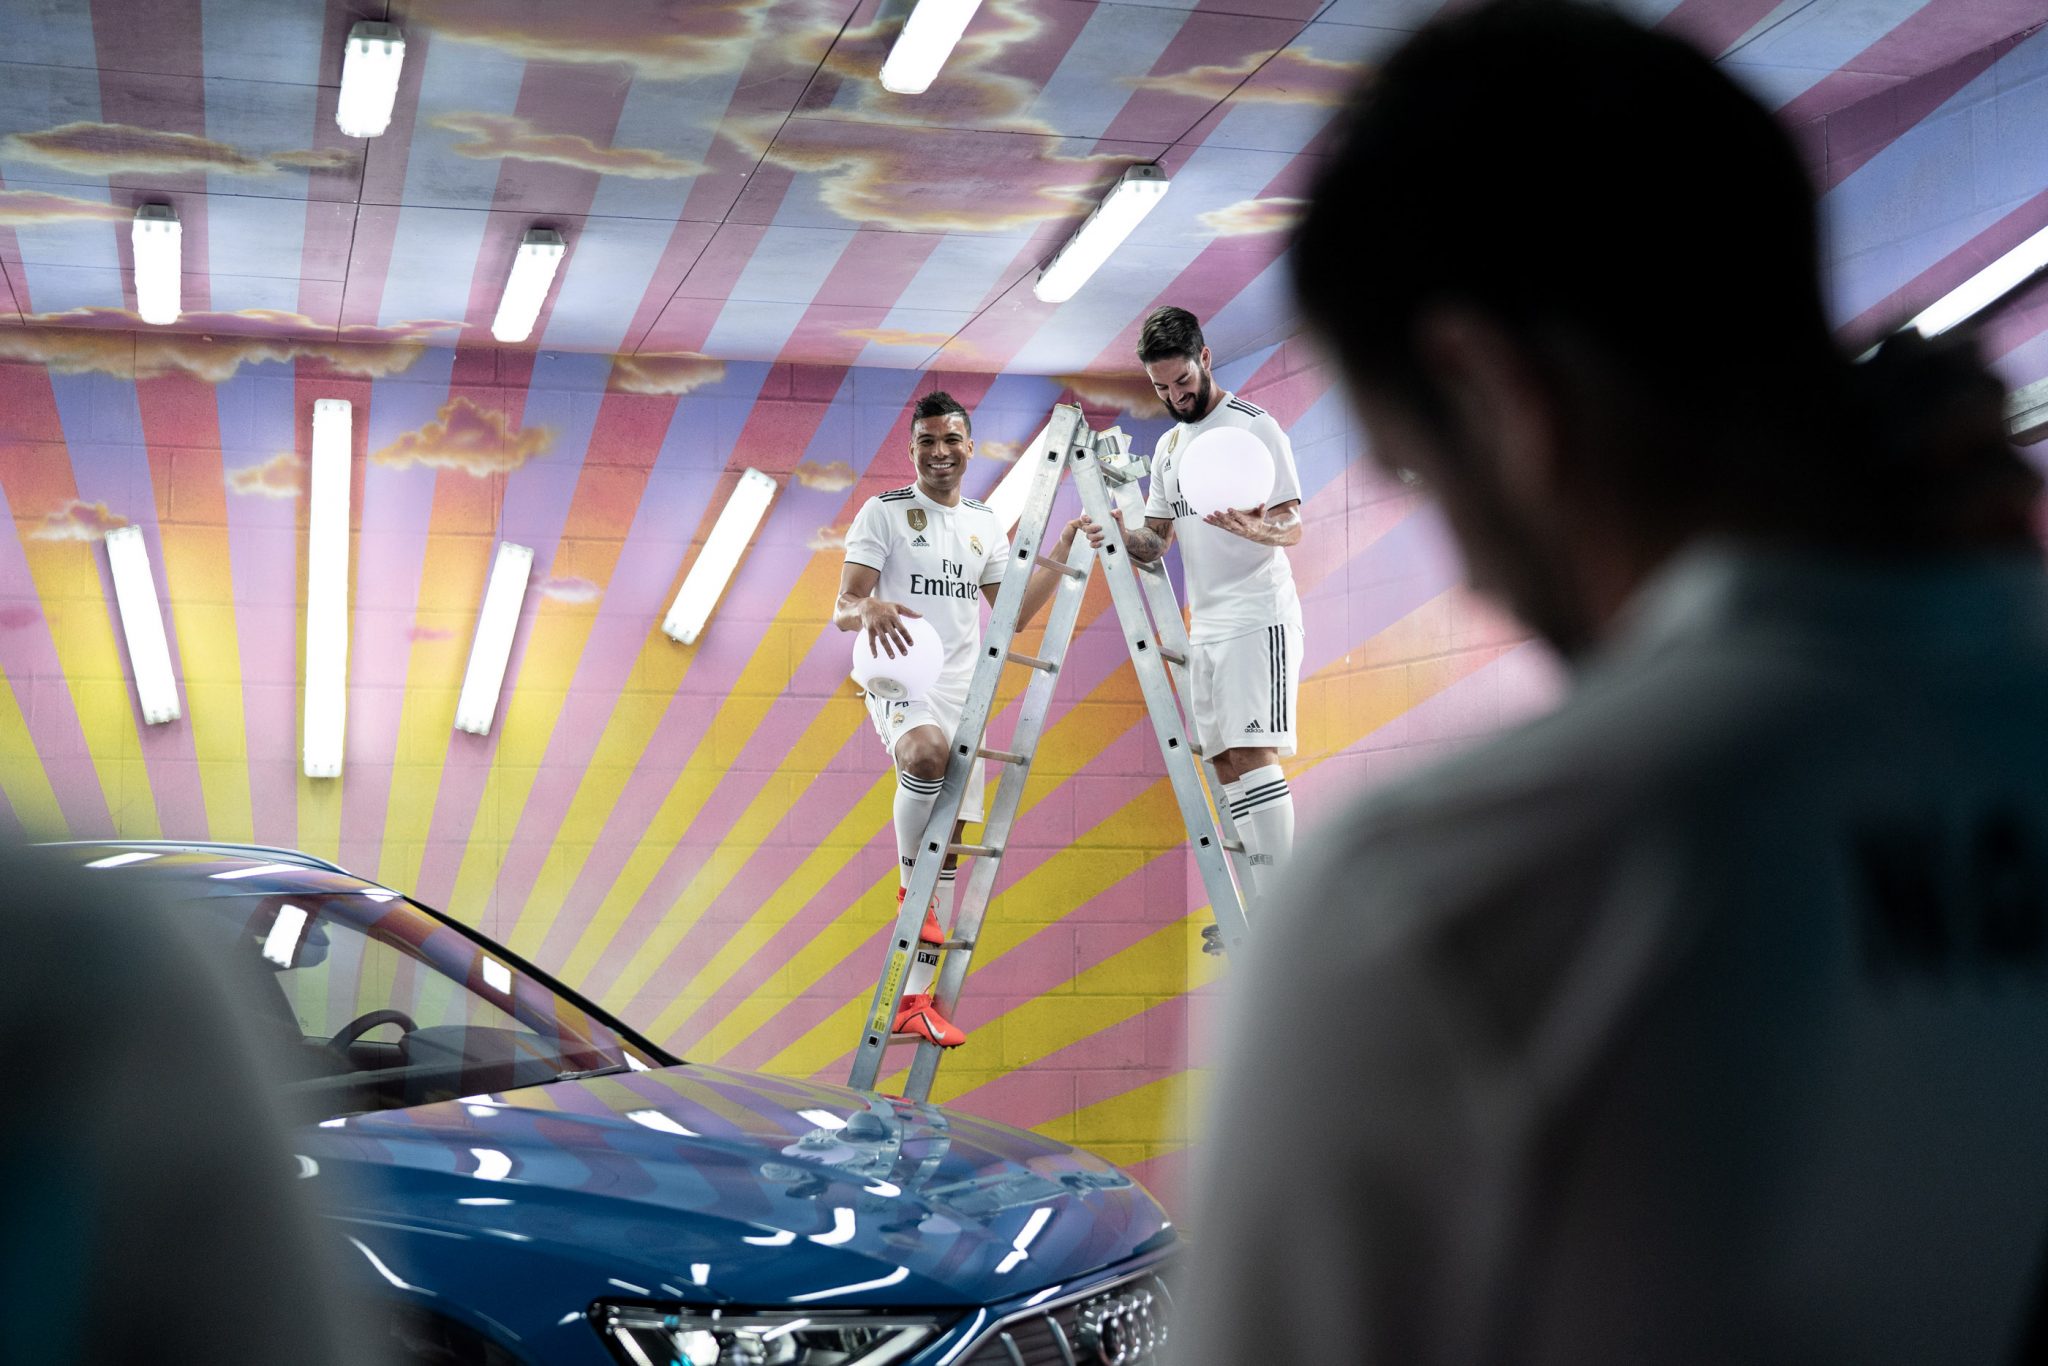 David LaChapelle | Audi x Real Madrid | Behind-the-scenes photographs from the Audi E-tron launch shoot in Madrid. | 10